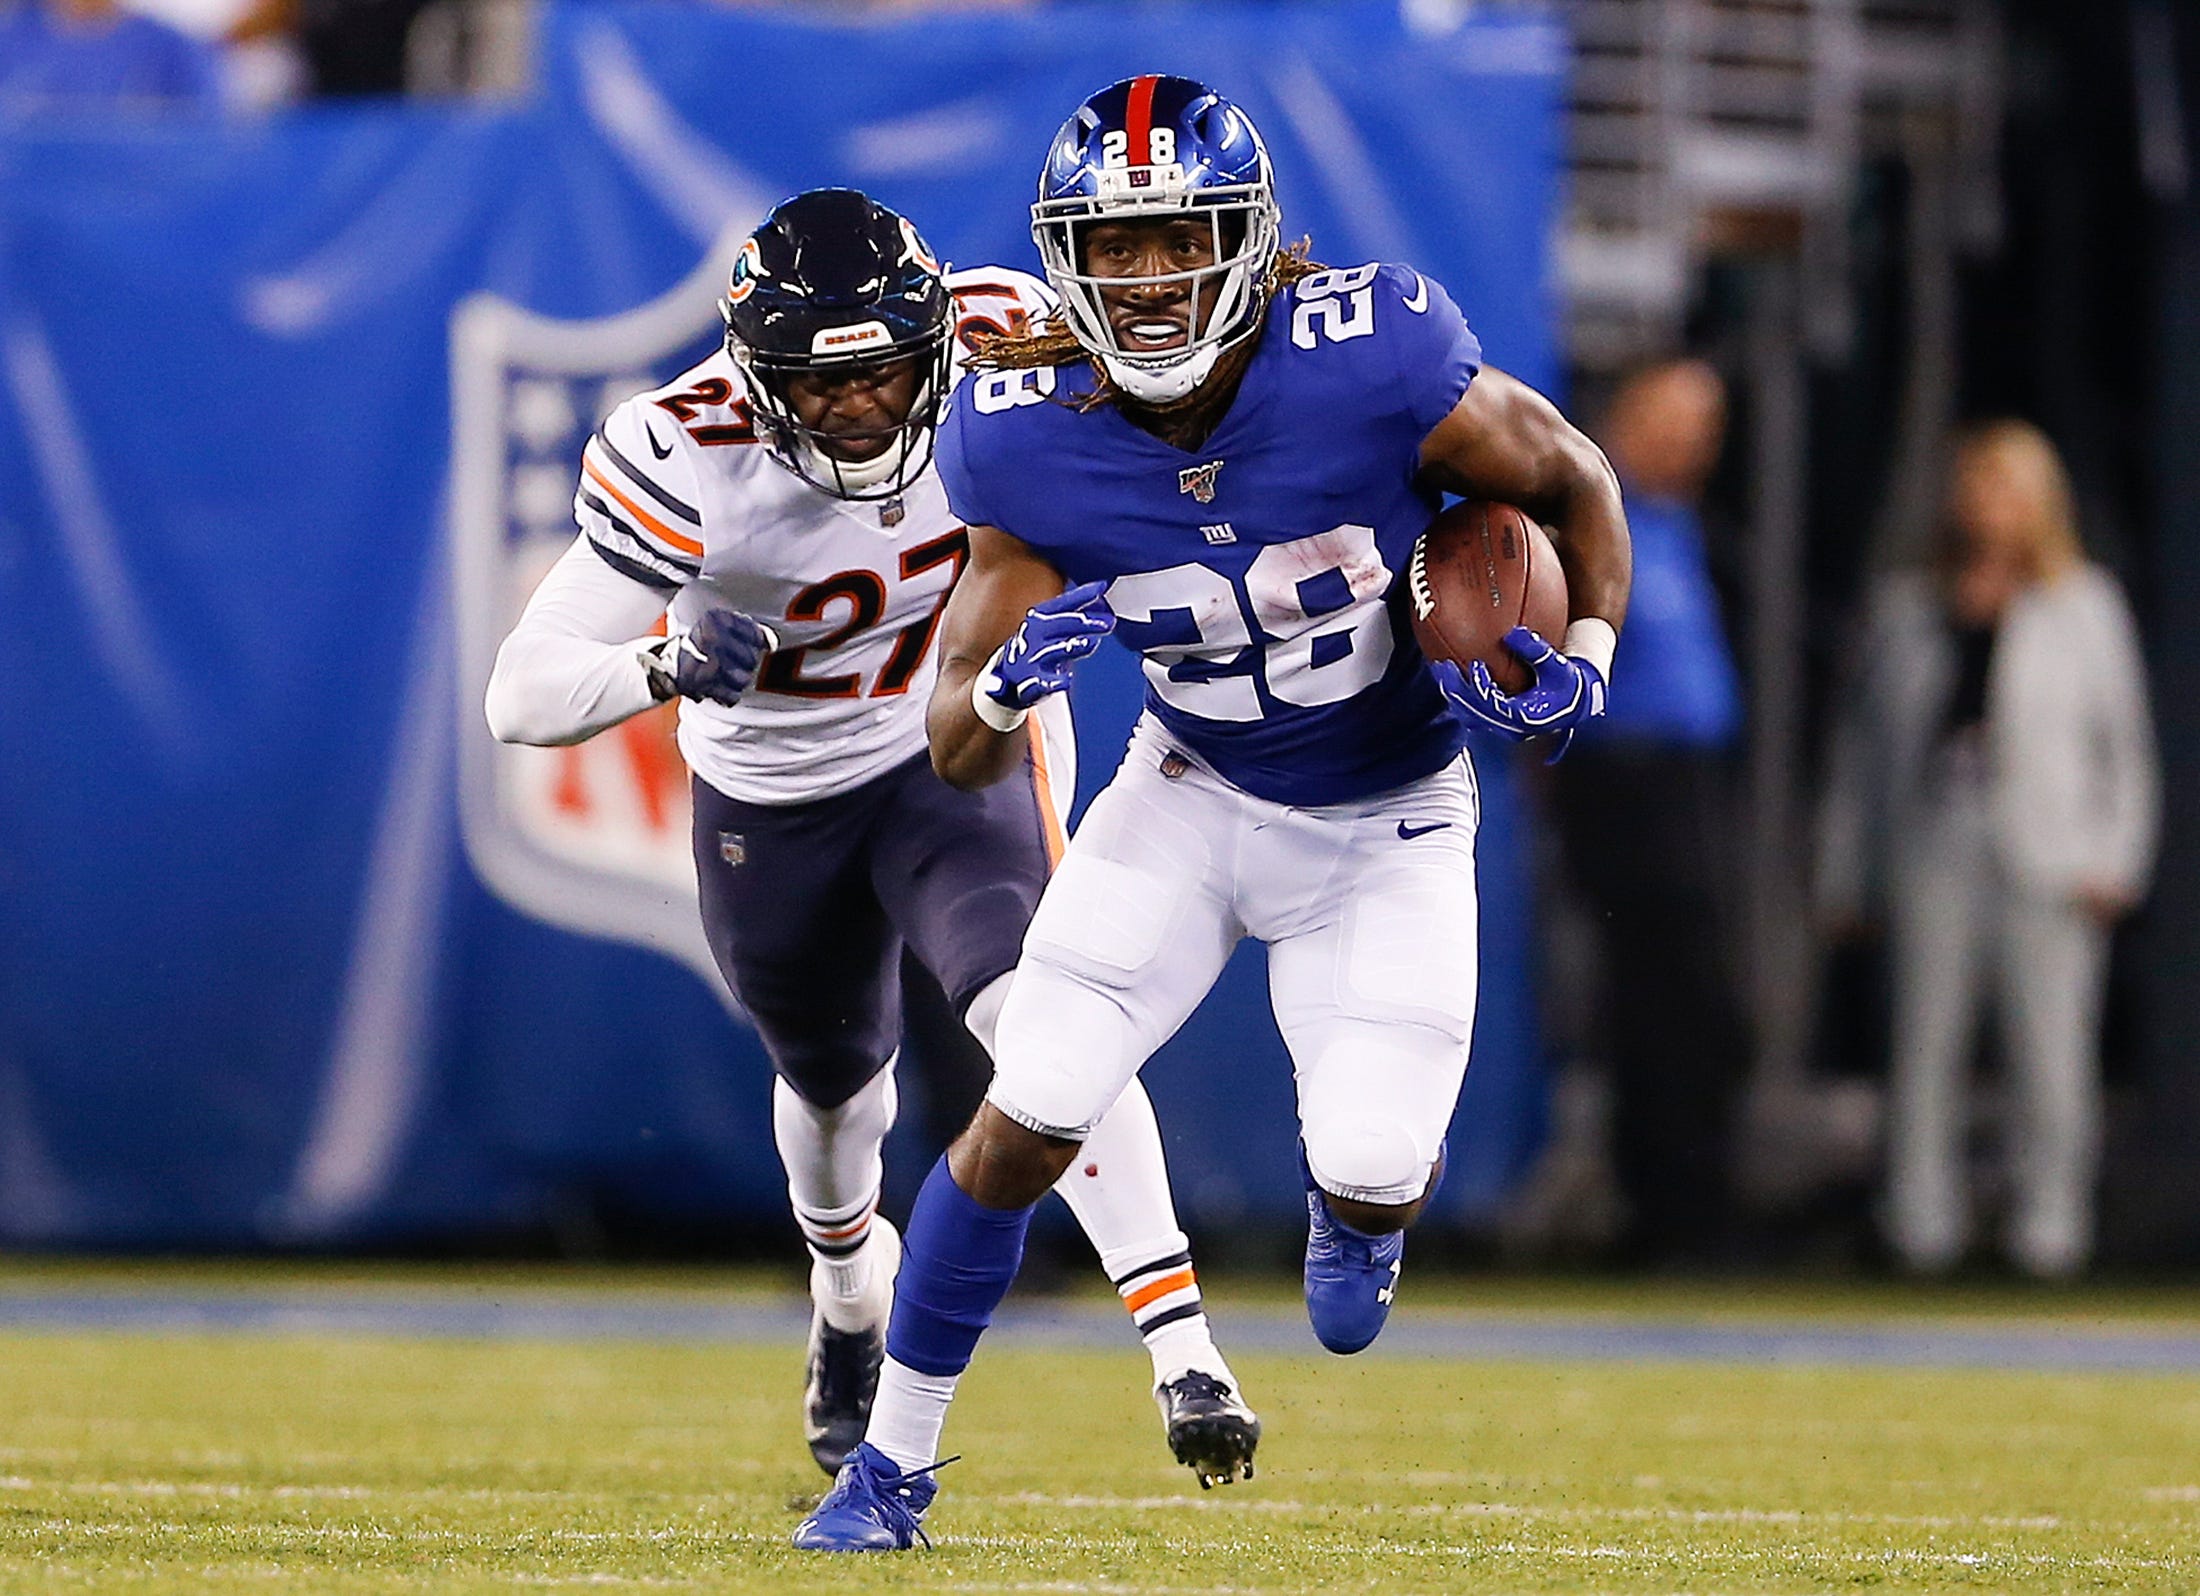 Giants' Paul Perkins on bubble after season lost to injury